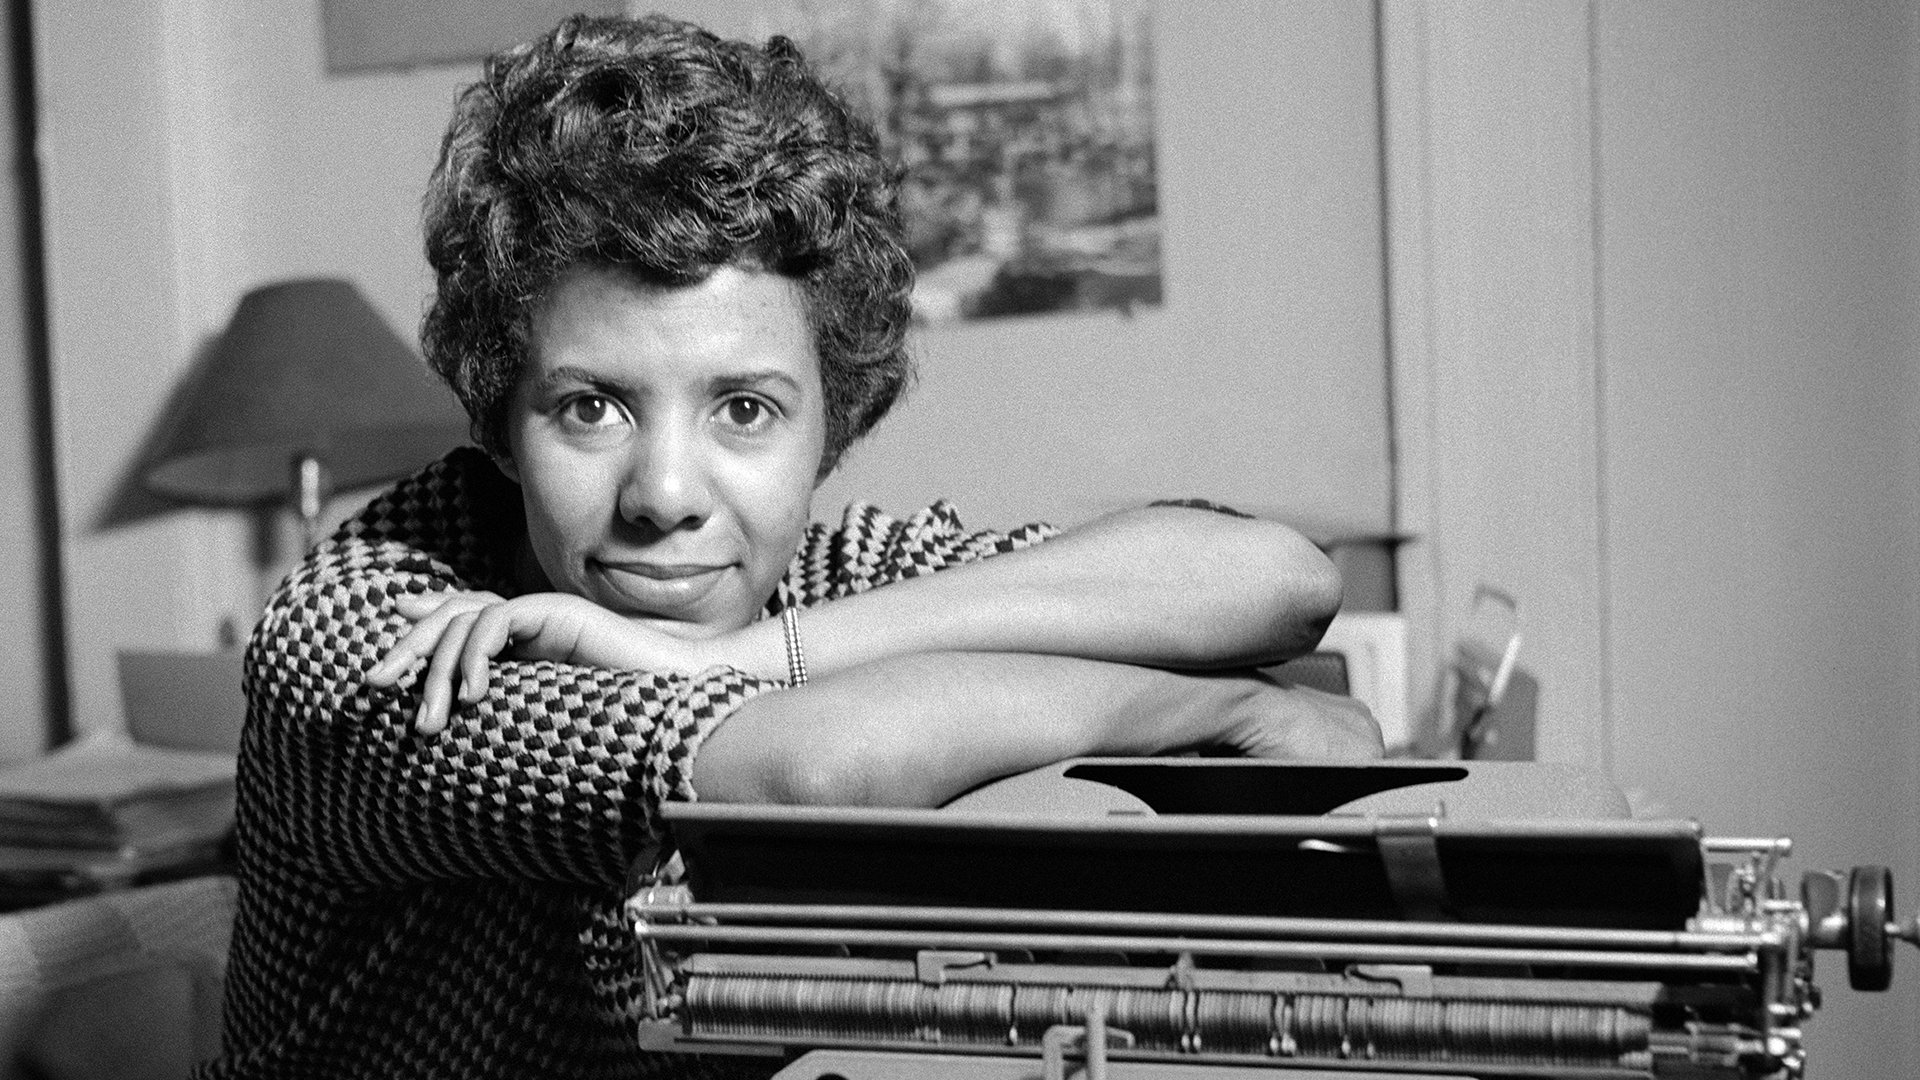 Six playwrights will honor works from Malcolm X and Lorraine Hansberry in new play.  